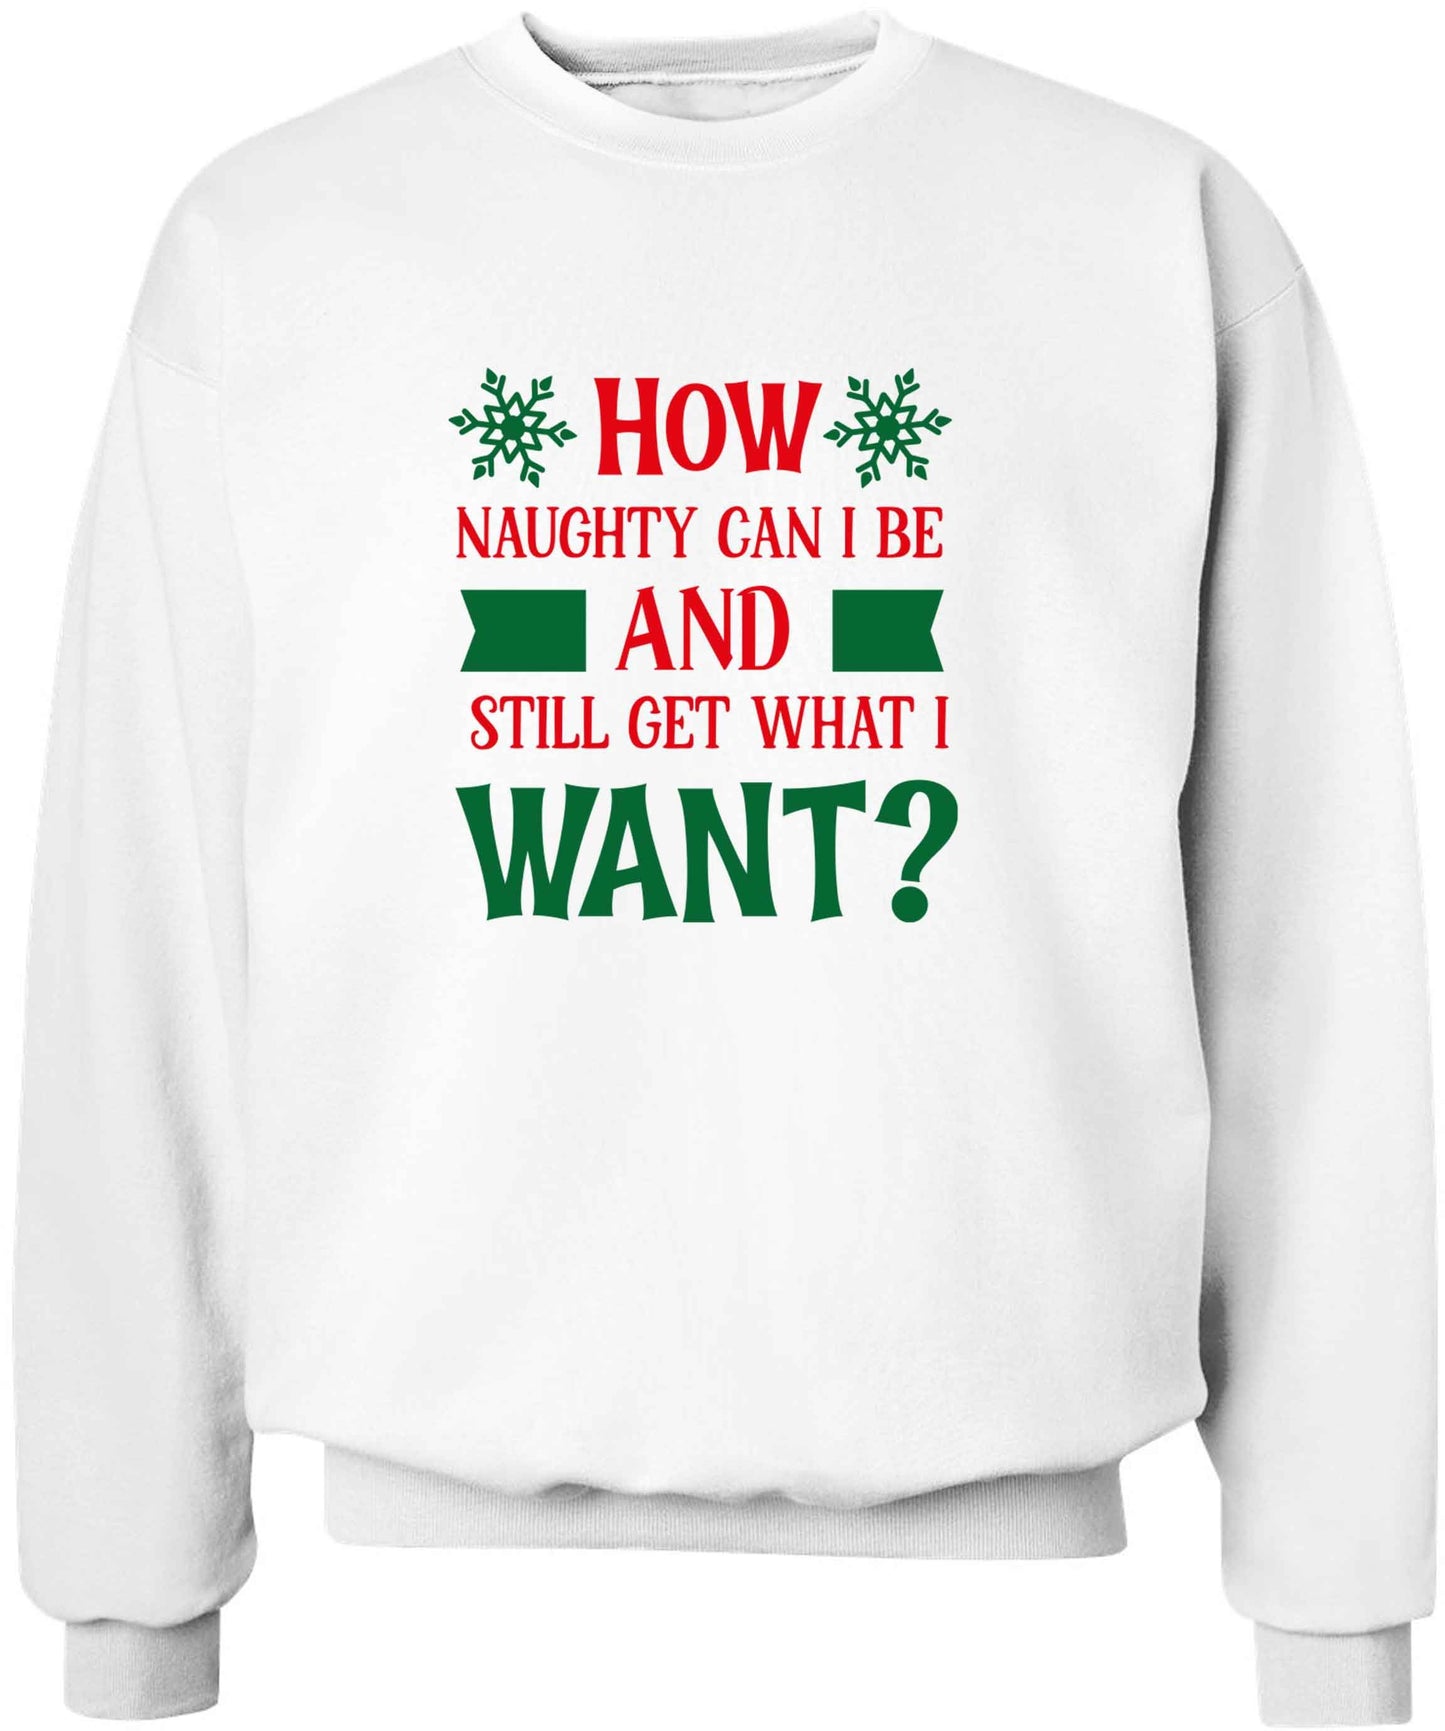 How naughty can I be and still get what I want? adult's unisex white sweater 2XL